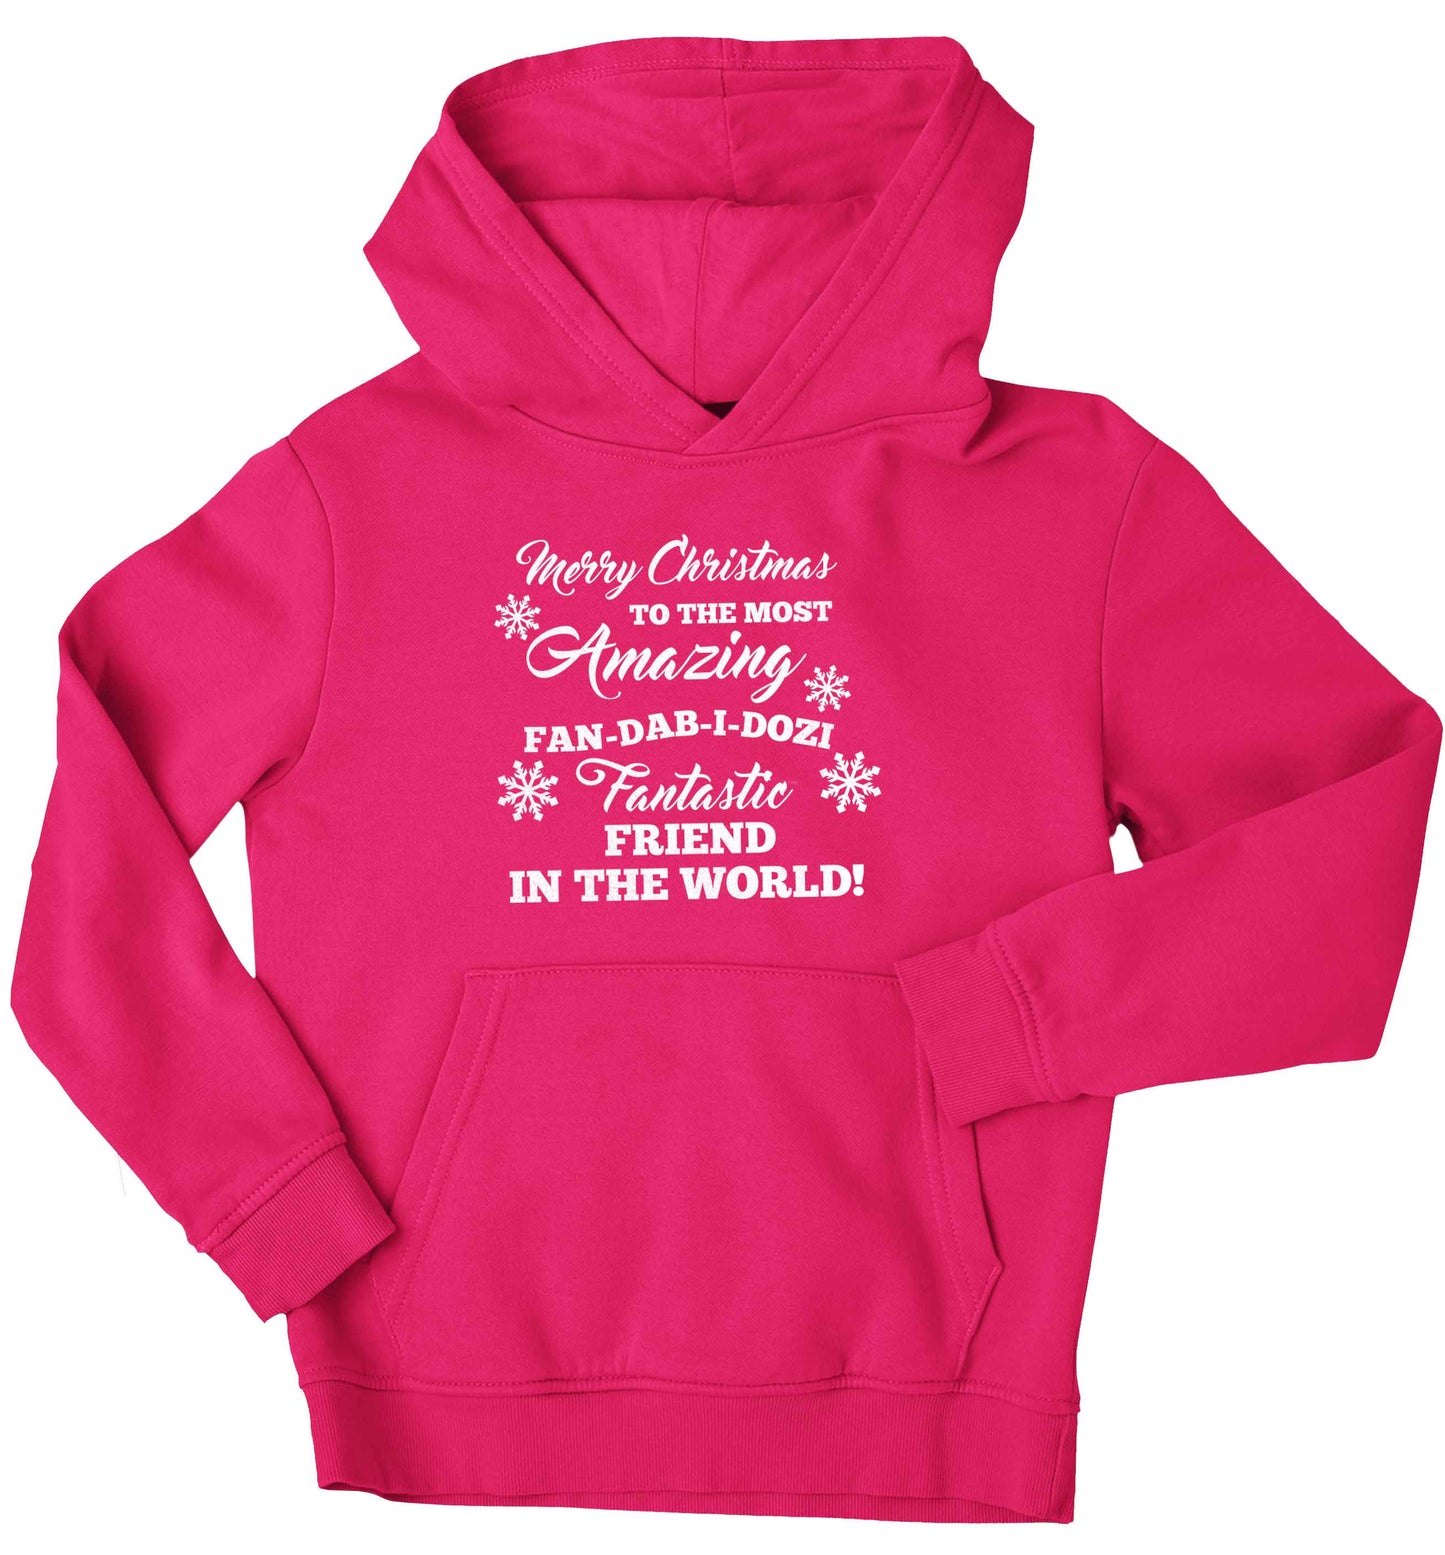 Merry Christmas to the most amazing fan-dab-i-dozi fantasic friend in the world children's pink hoodie 12-13 Years